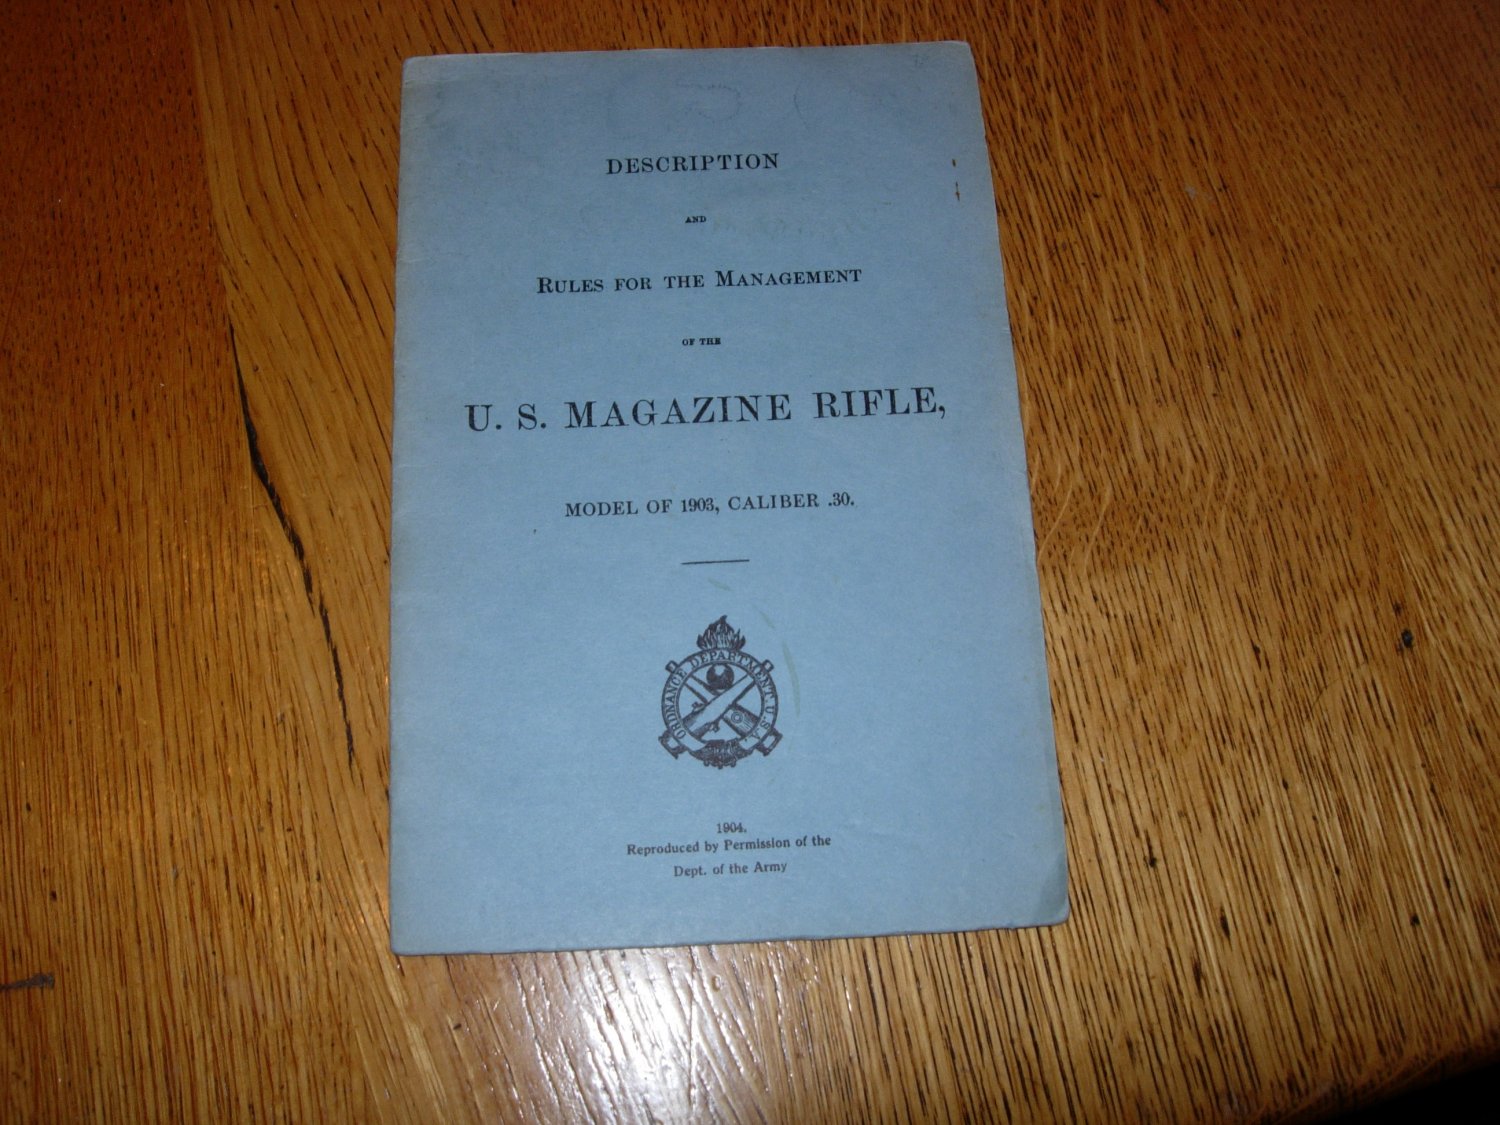 Description and Rules for the Management of the US Magazine Rifle Model 1903, 30 caliber